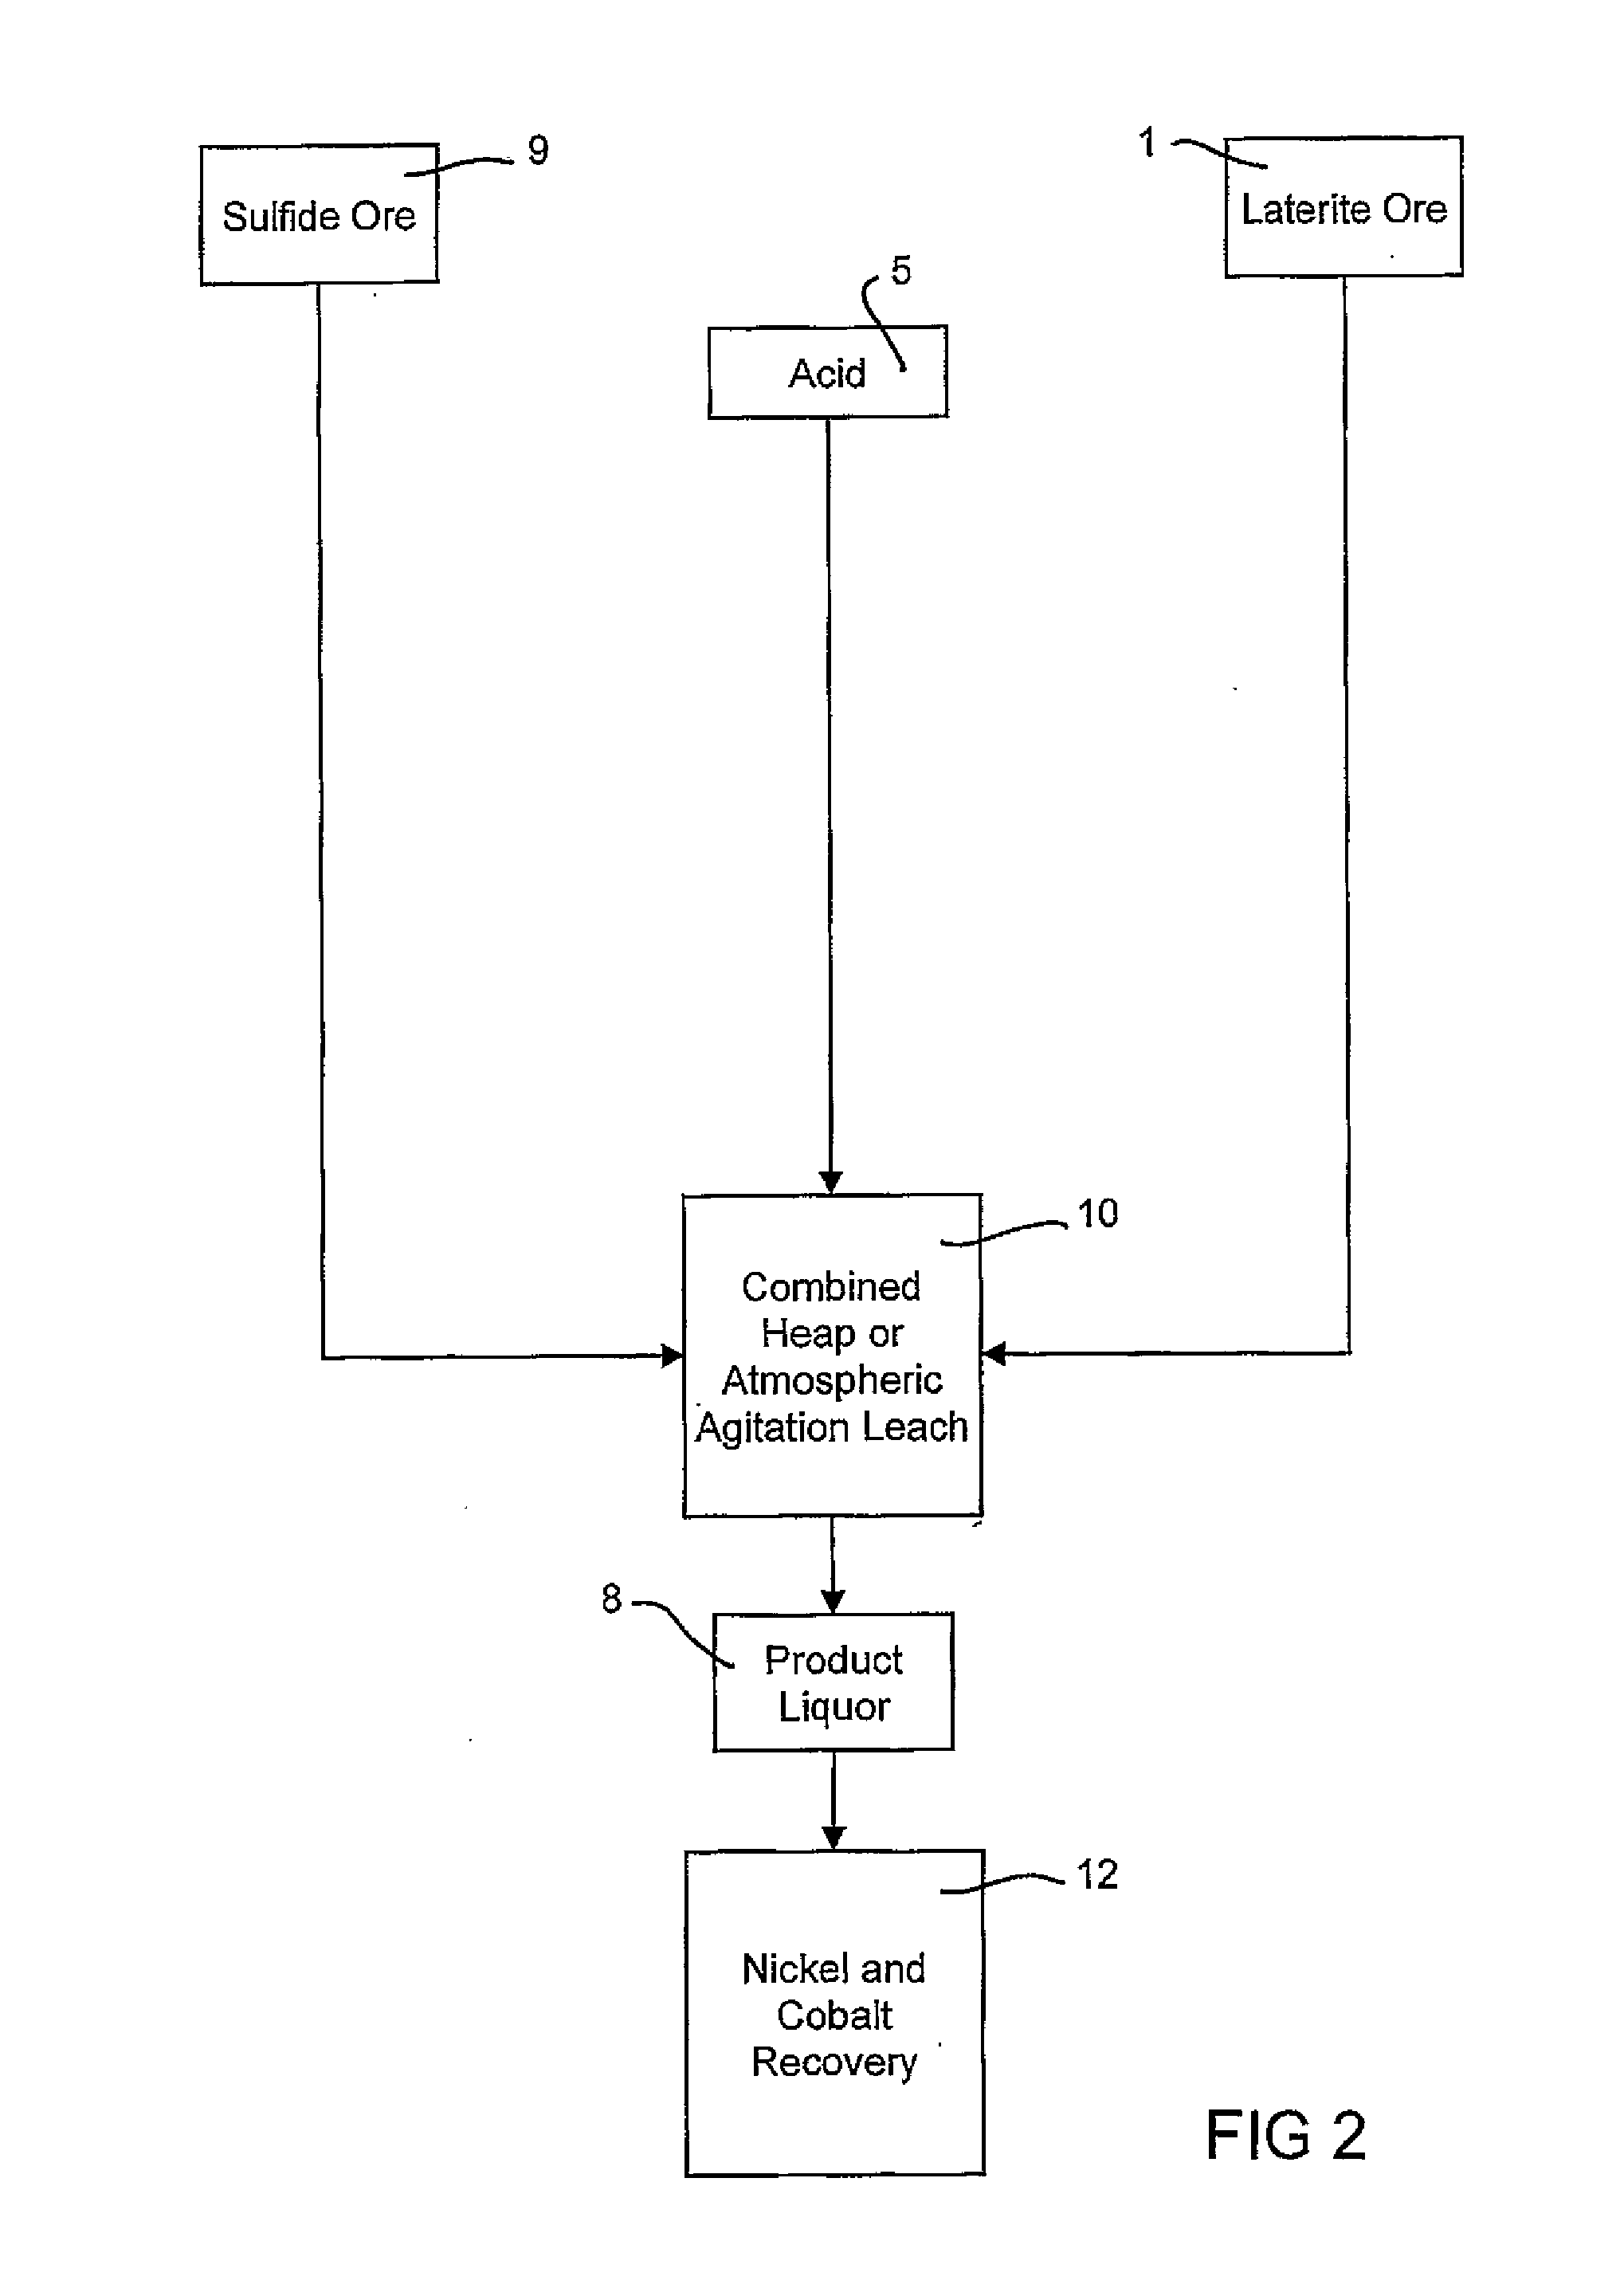 Consecutive or Simultaneous Leaching of Nickel and Cobalt Containing Ores